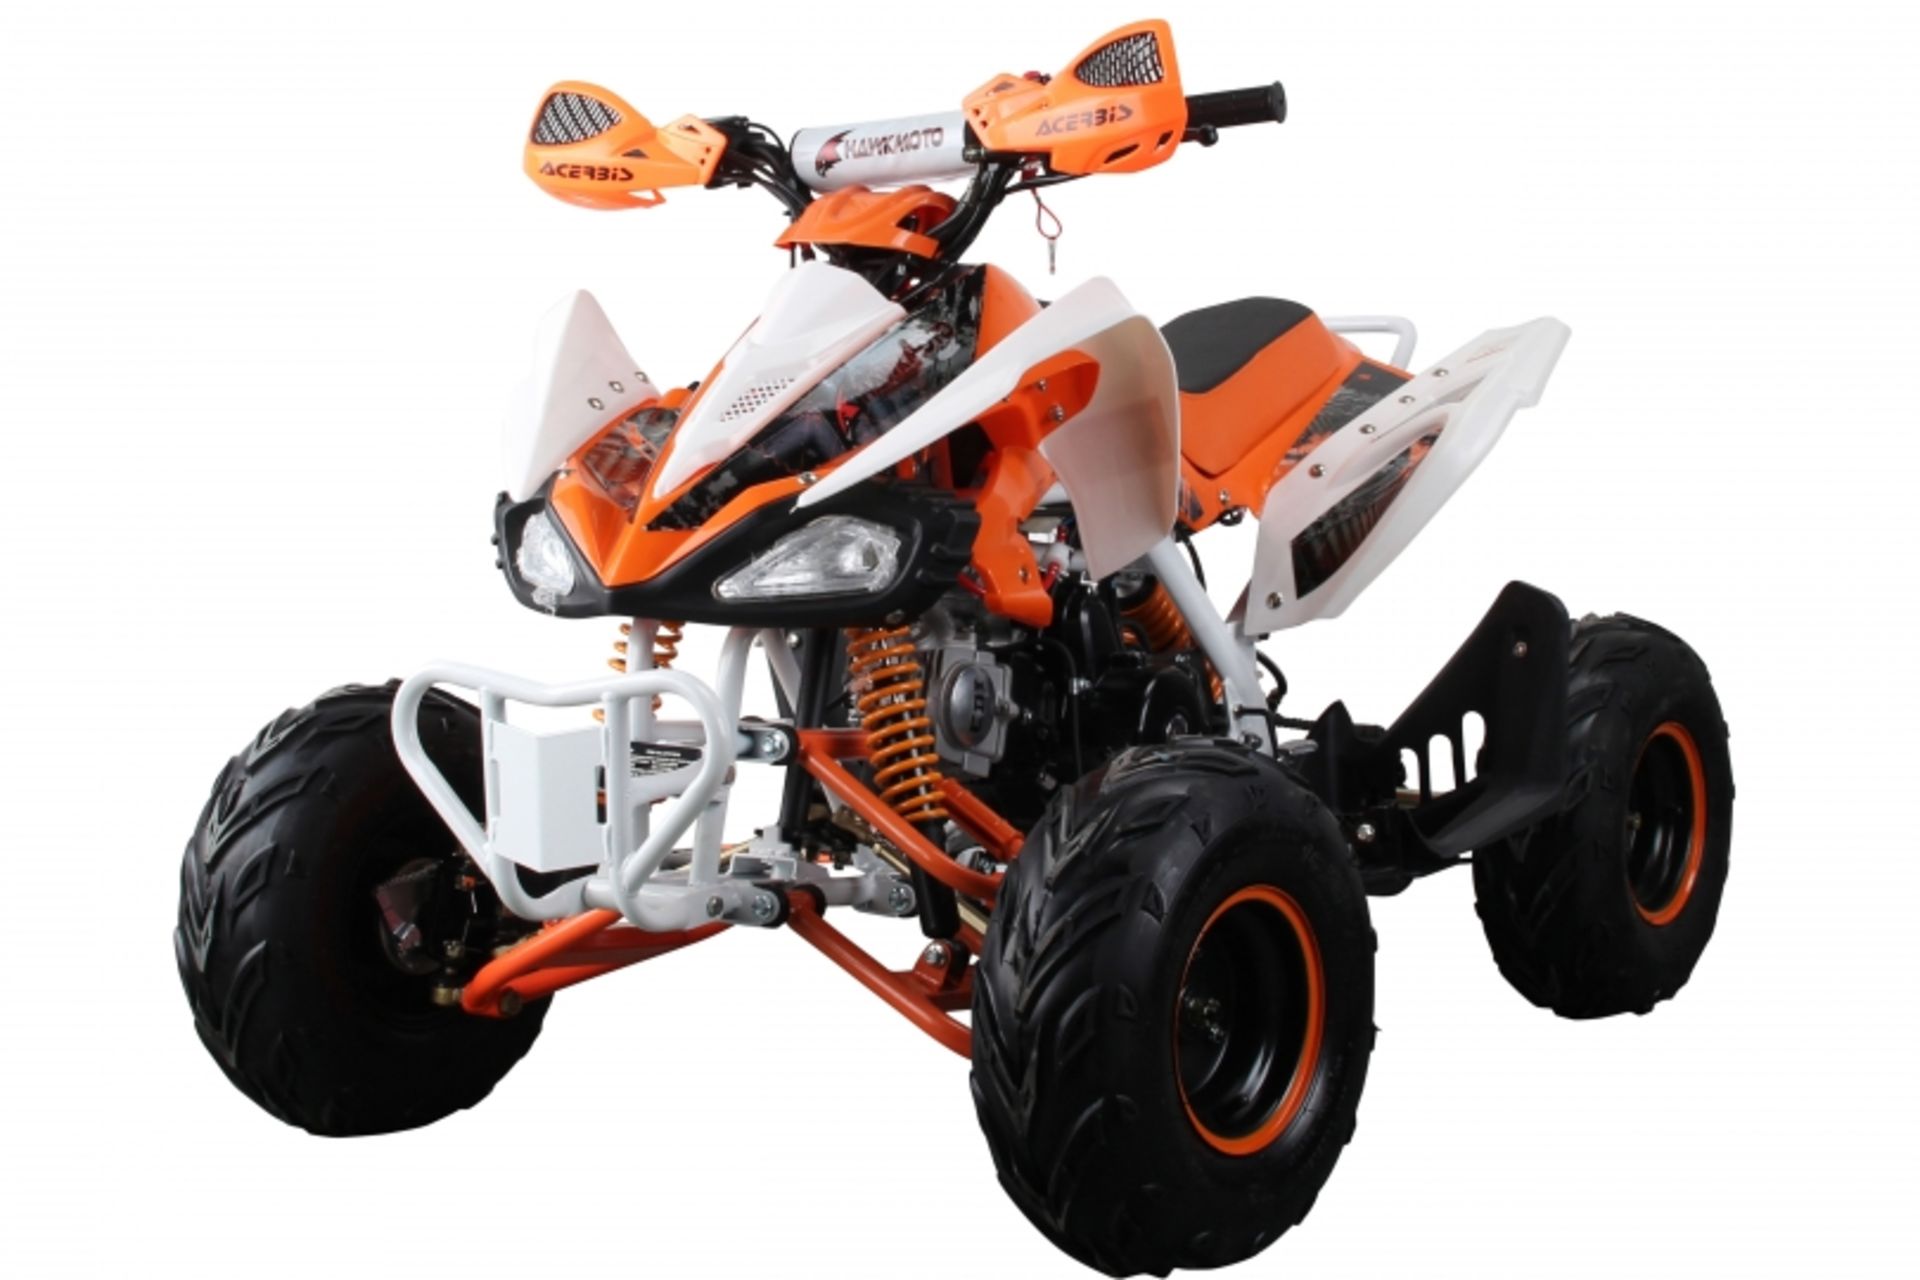 V Brand New 125cc Interceptor SV2 4 Stroke Quad Bike With Reverse Gear - Double Front Suspension/ - Image 3 of 7